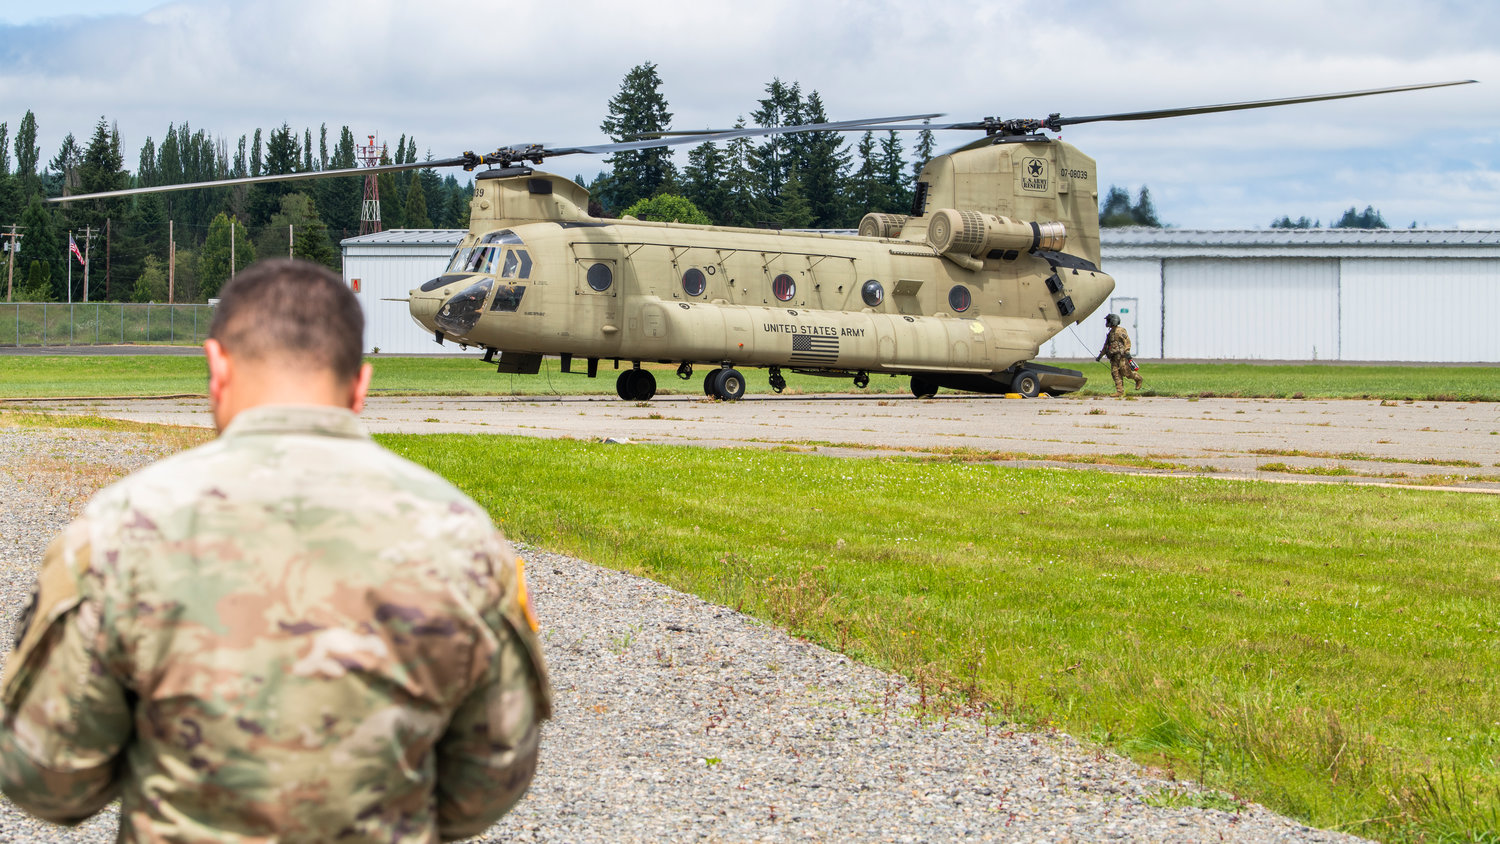 Crews from Joint Base Lewis-McChord exit a Chinook helicopter after a landing at the Chehalis-Centralia Airport as they prepare to fuel up during a military training exercise on Wednesday, June 22.